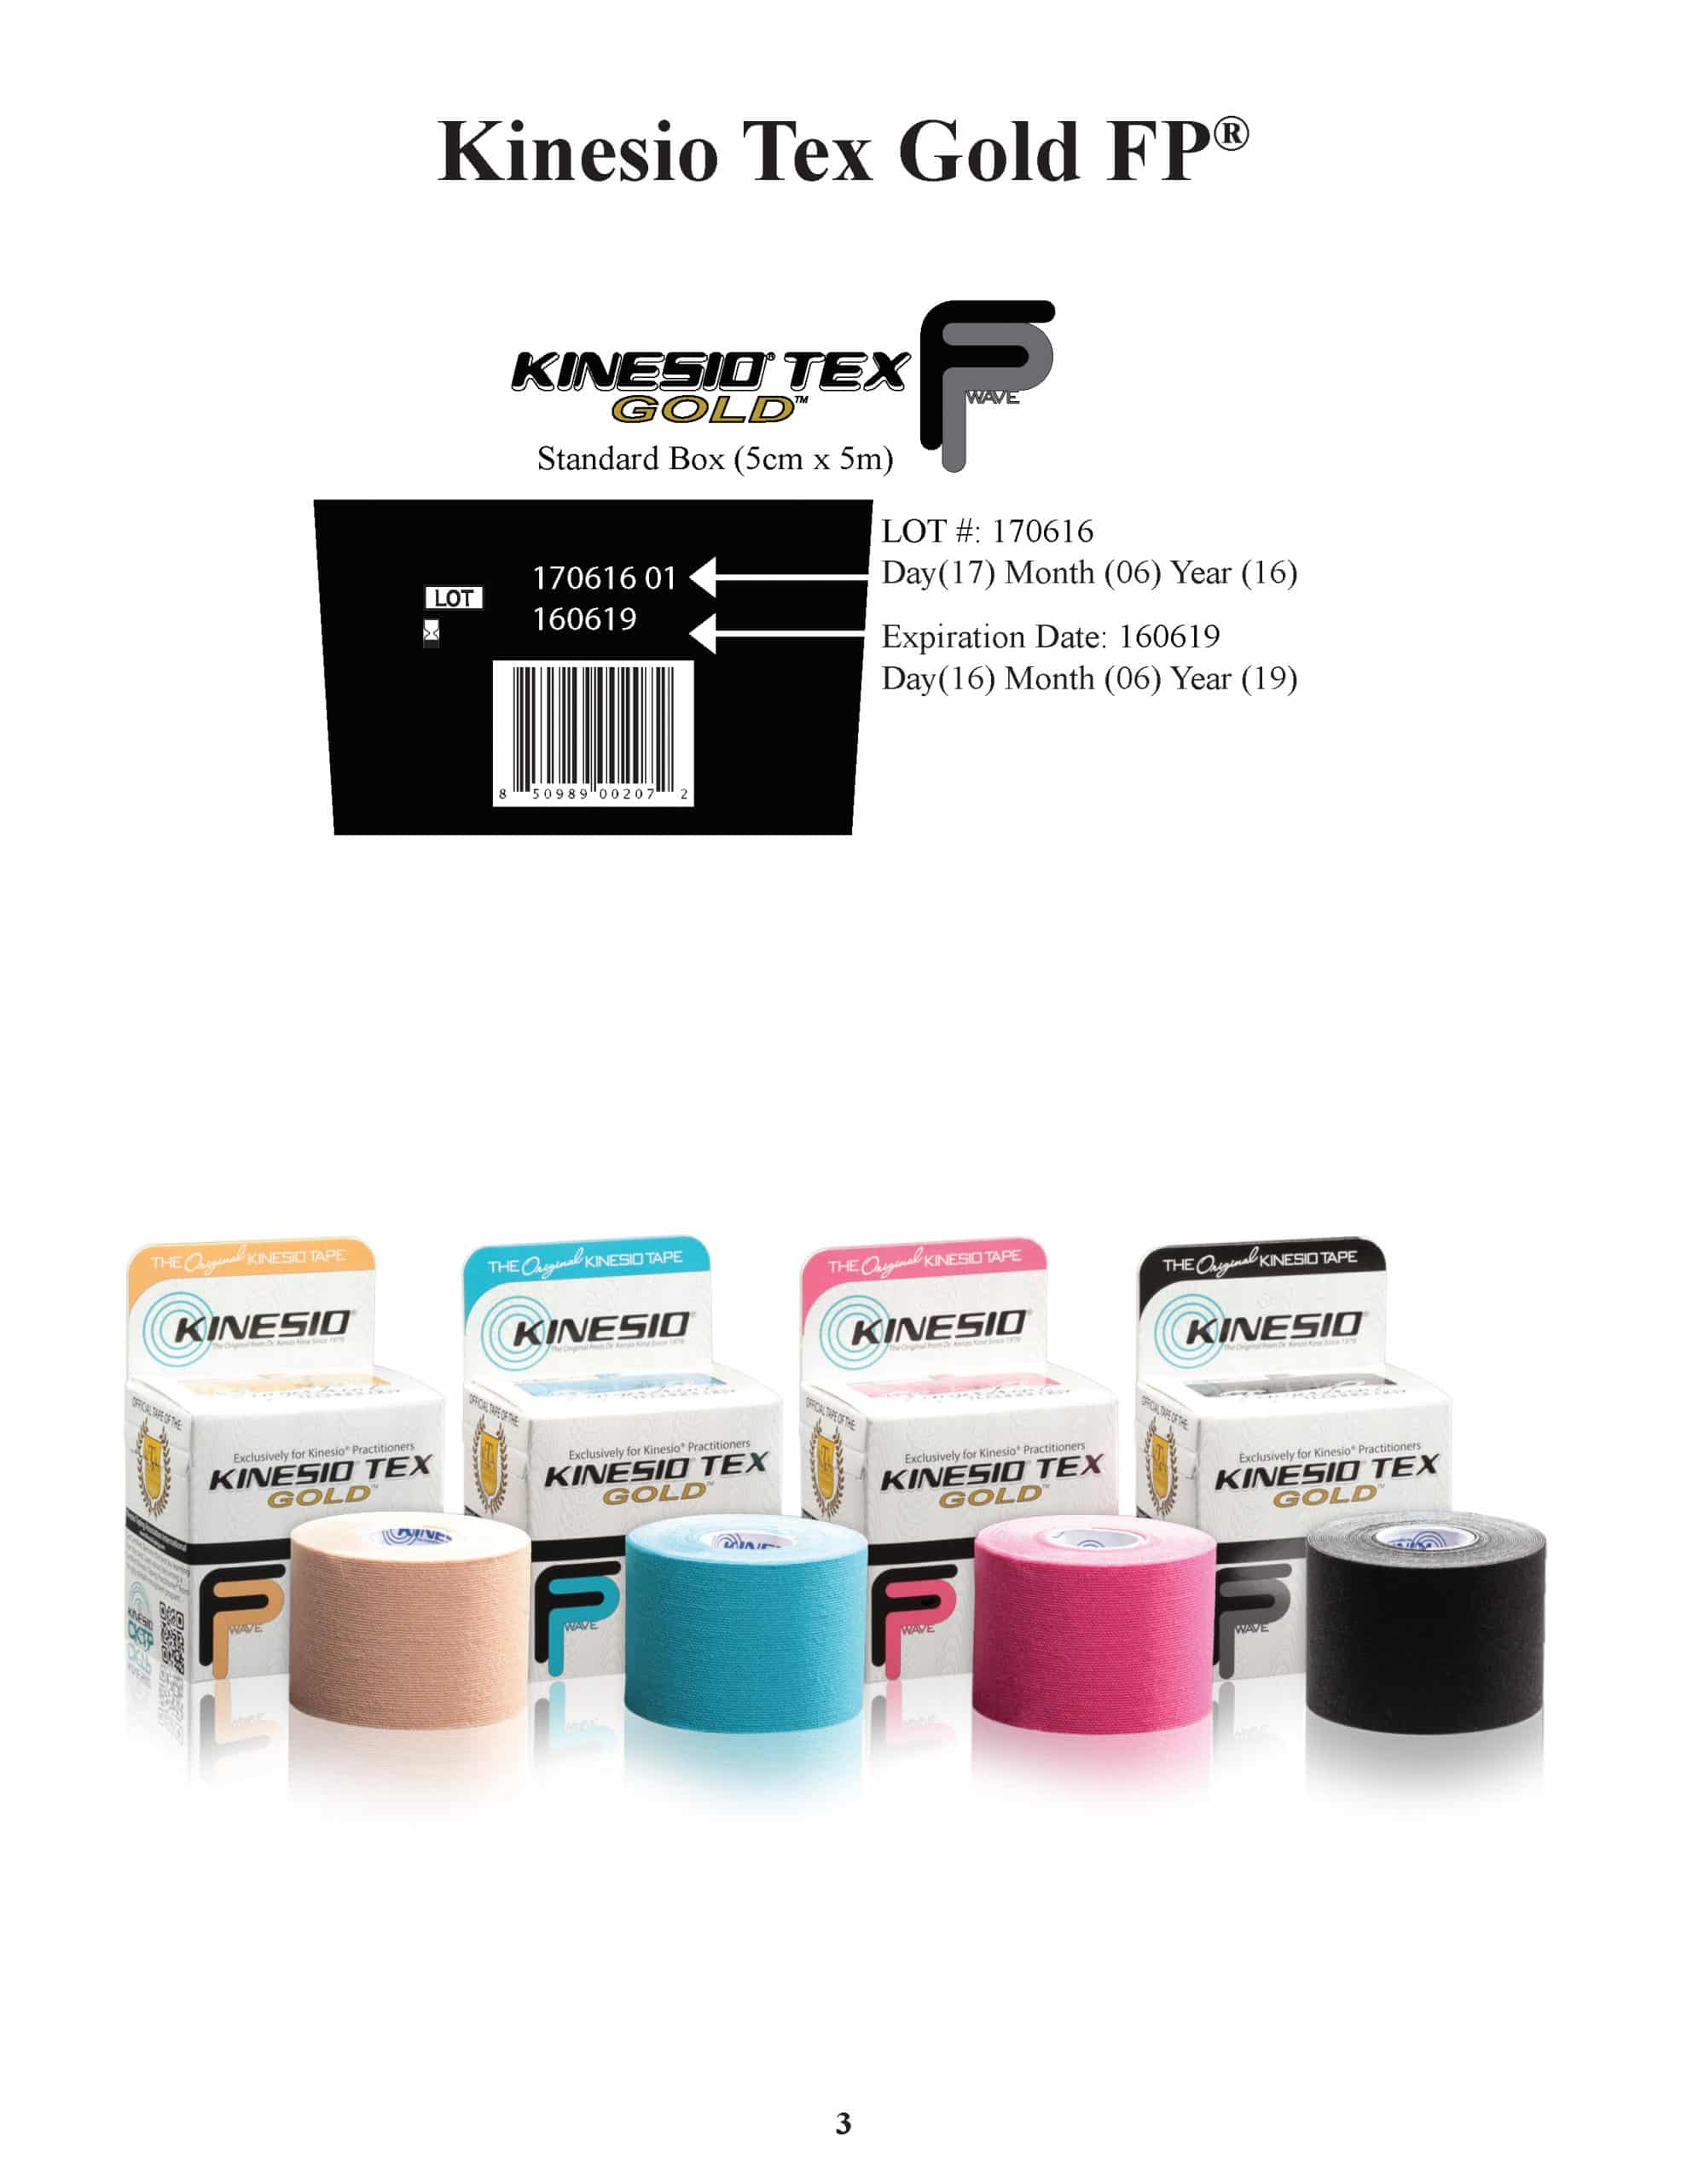 Ultimate Performance Unisex Advanced Kinesiology Tape 5cm x 5m Roll Sports 